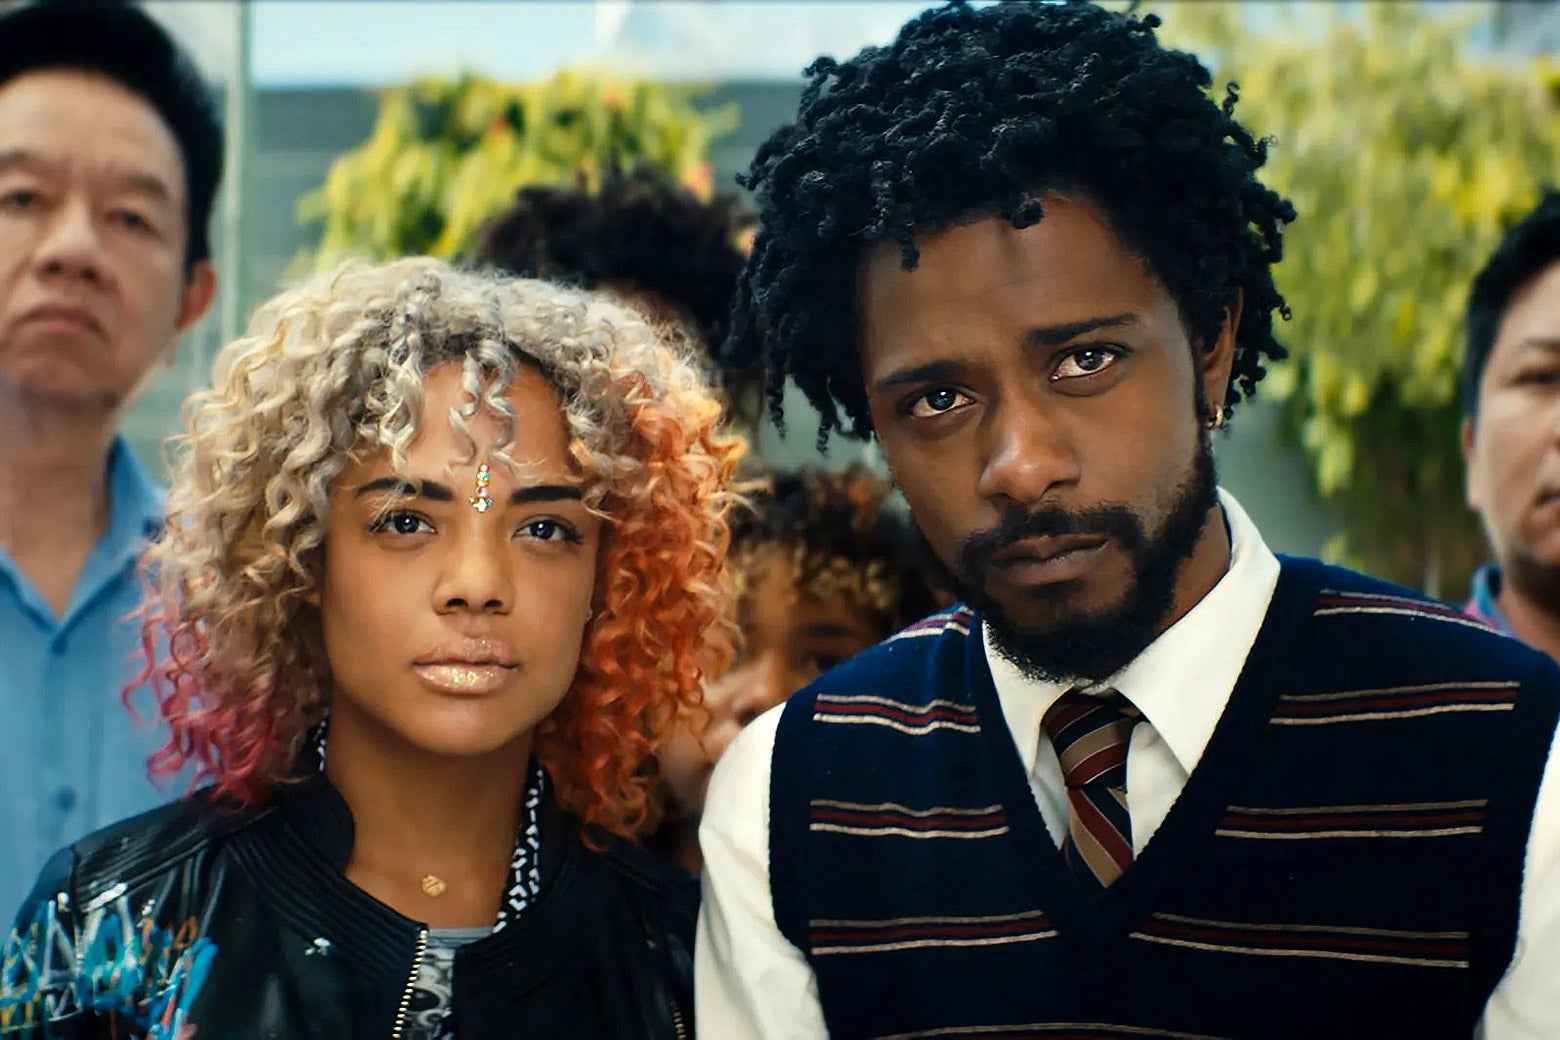 LaKeith Stanfield and Tessa Thompson standing side by side.